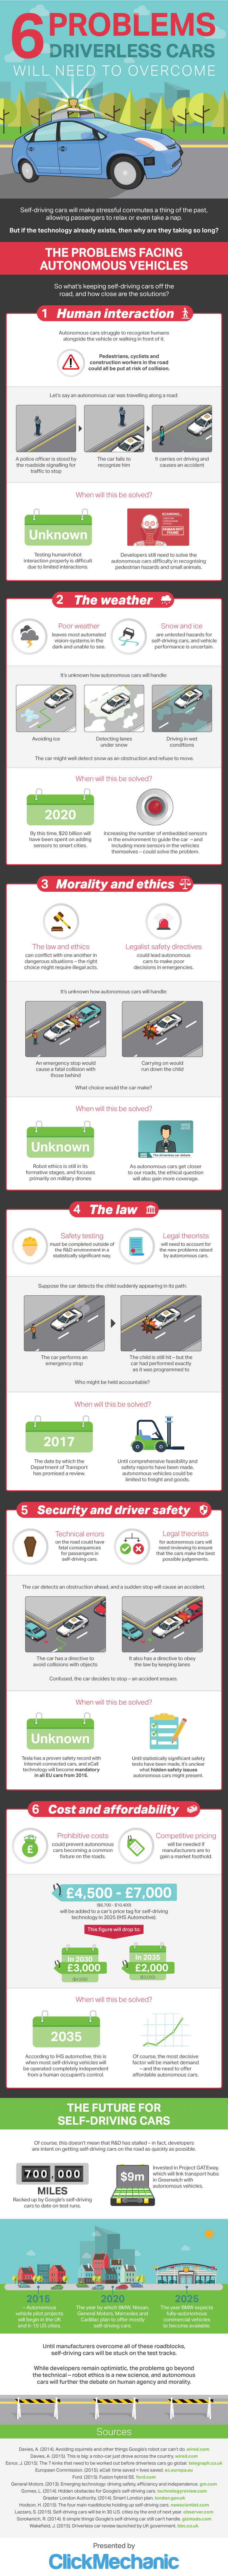 6 Problems Facing Driverless Cars #infographic